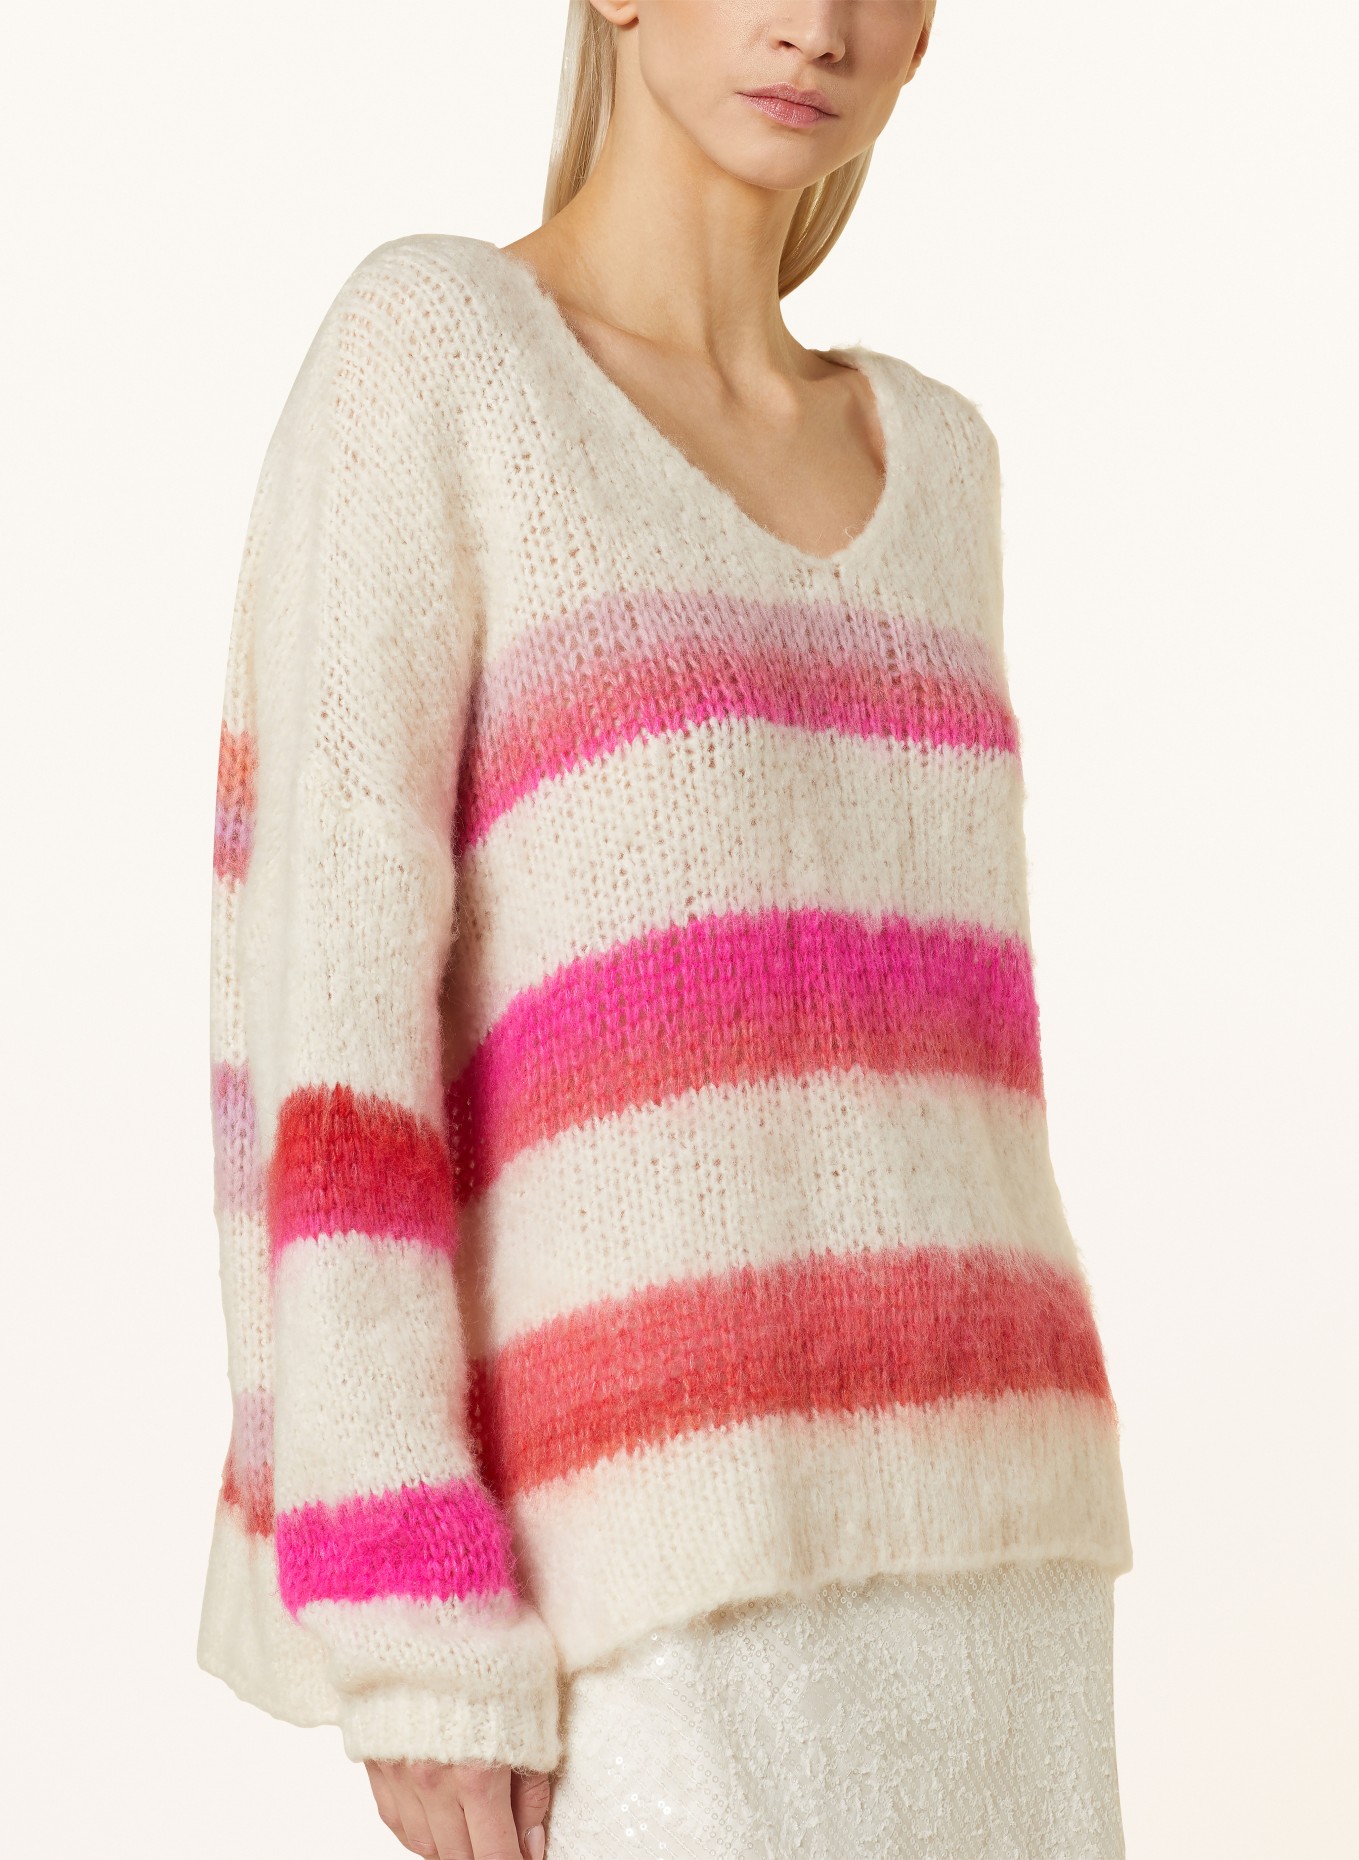 miss goodlife Sweater with mohair, Color: CREAM/ ROSE/ LIGHT ORANGE (Image 4)